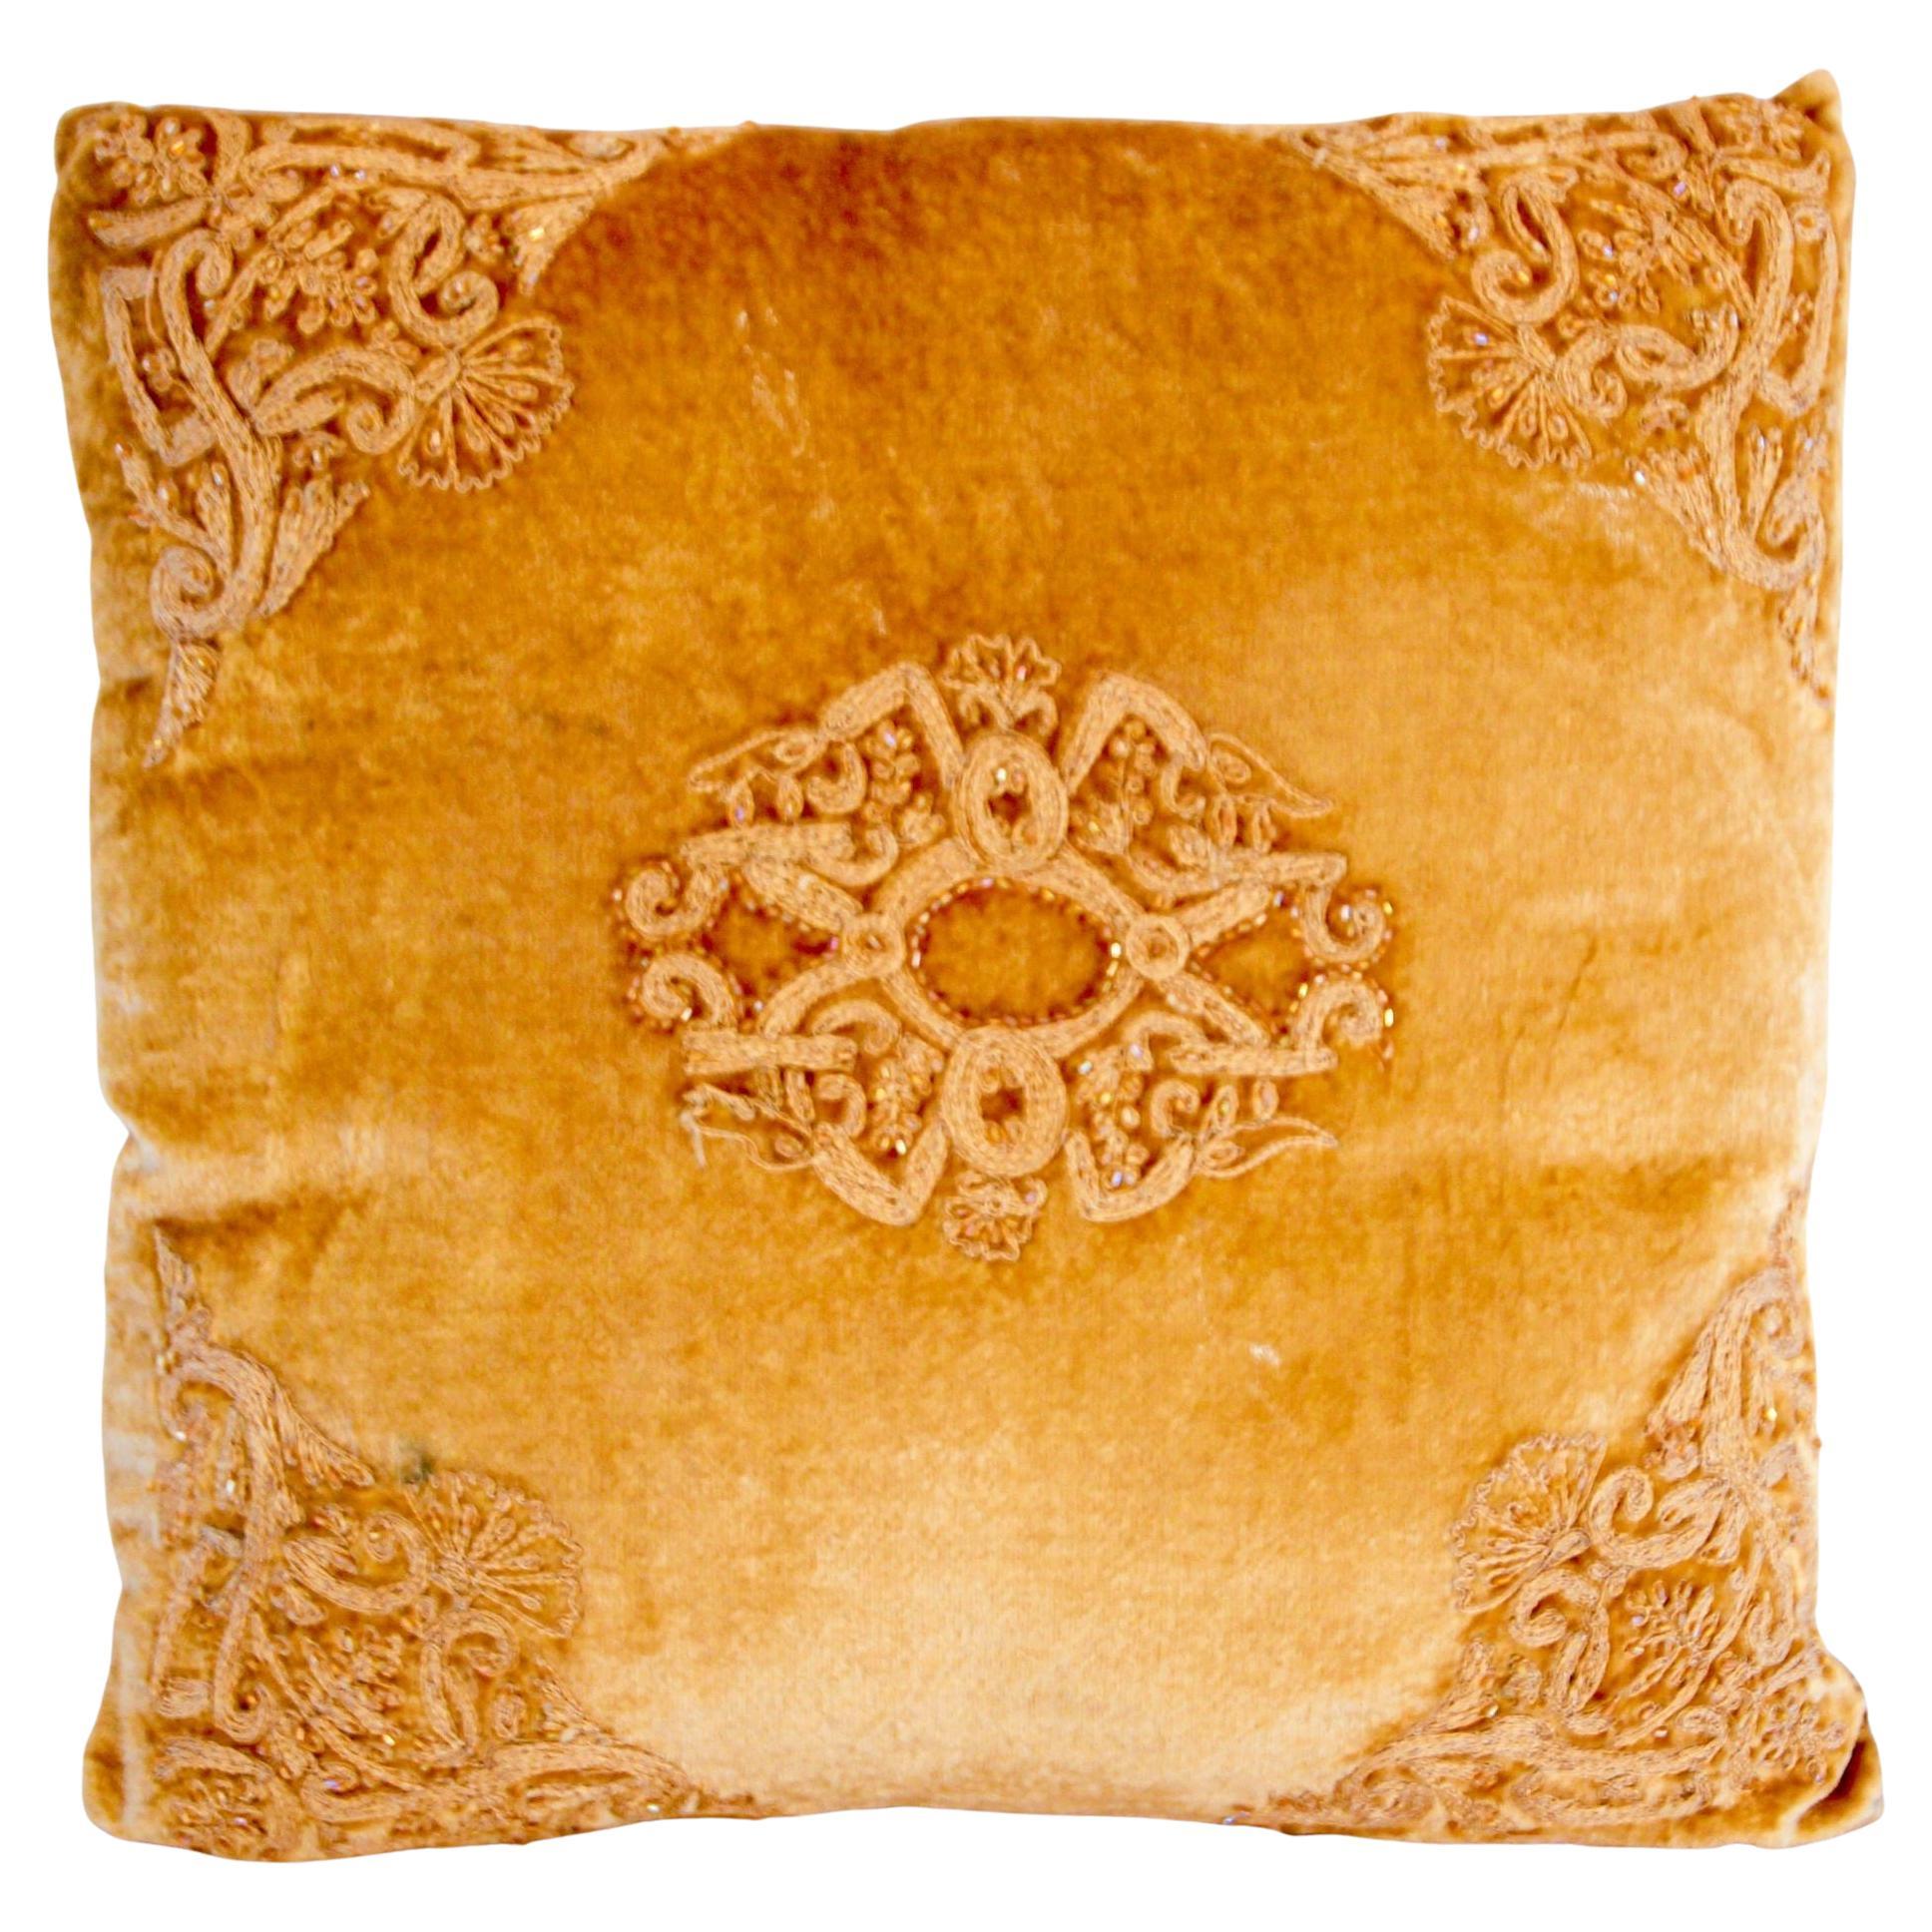 Vintage Velvet Pillow Tan and Gold Color Embroidered in Moorish Designs